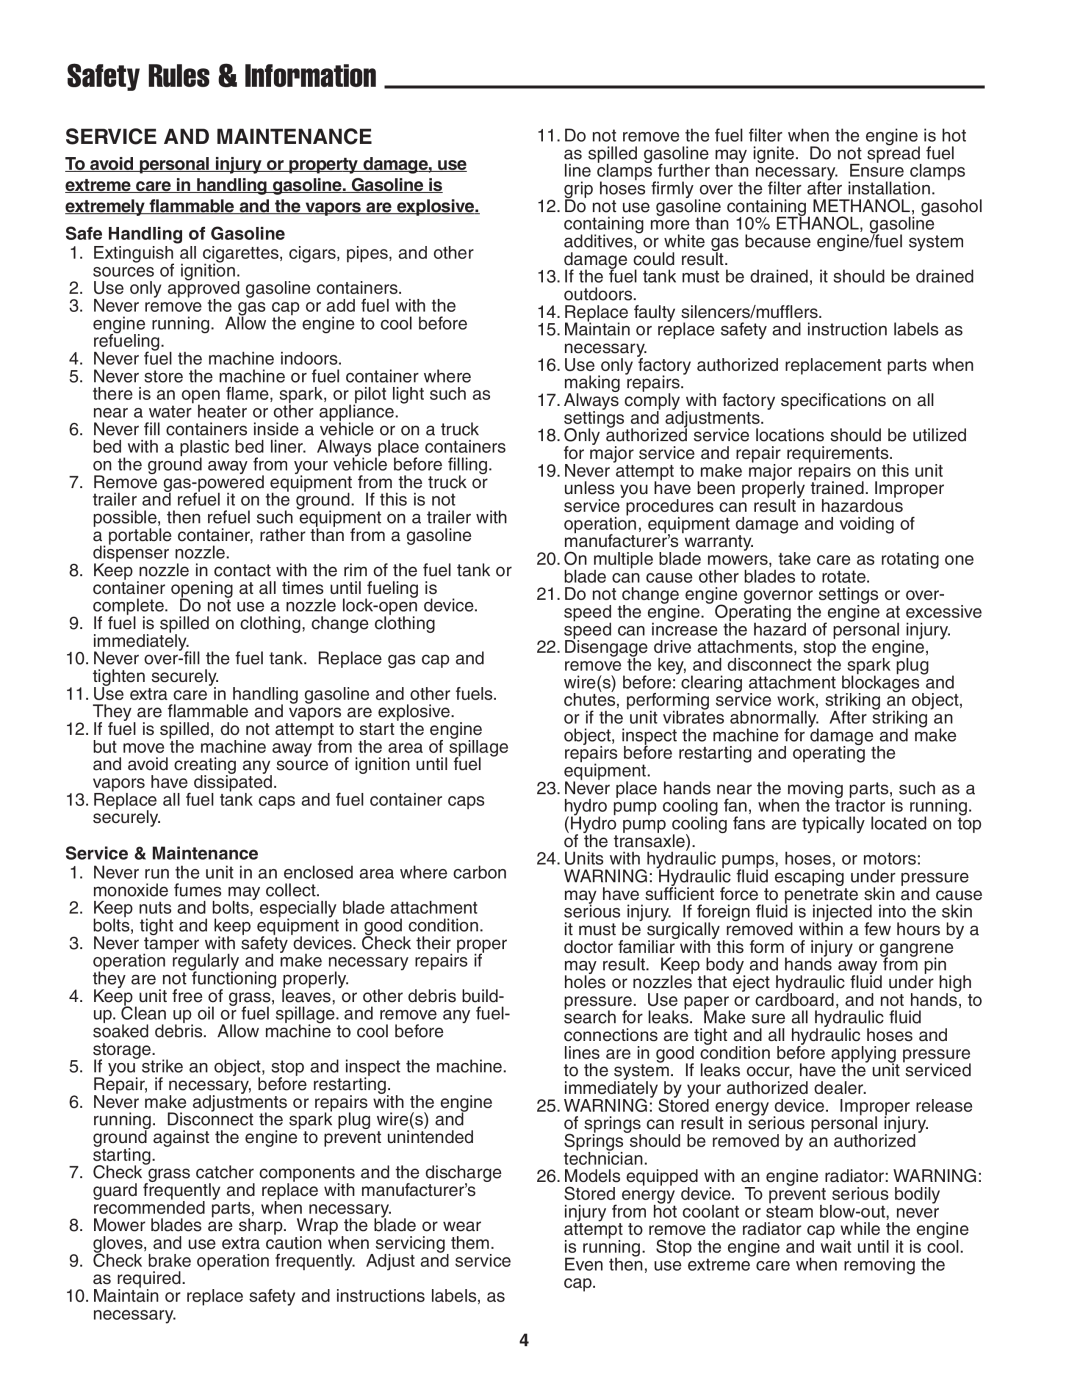 Snapper 13HP manual Safety Rules & Information, Service And Maintenance 